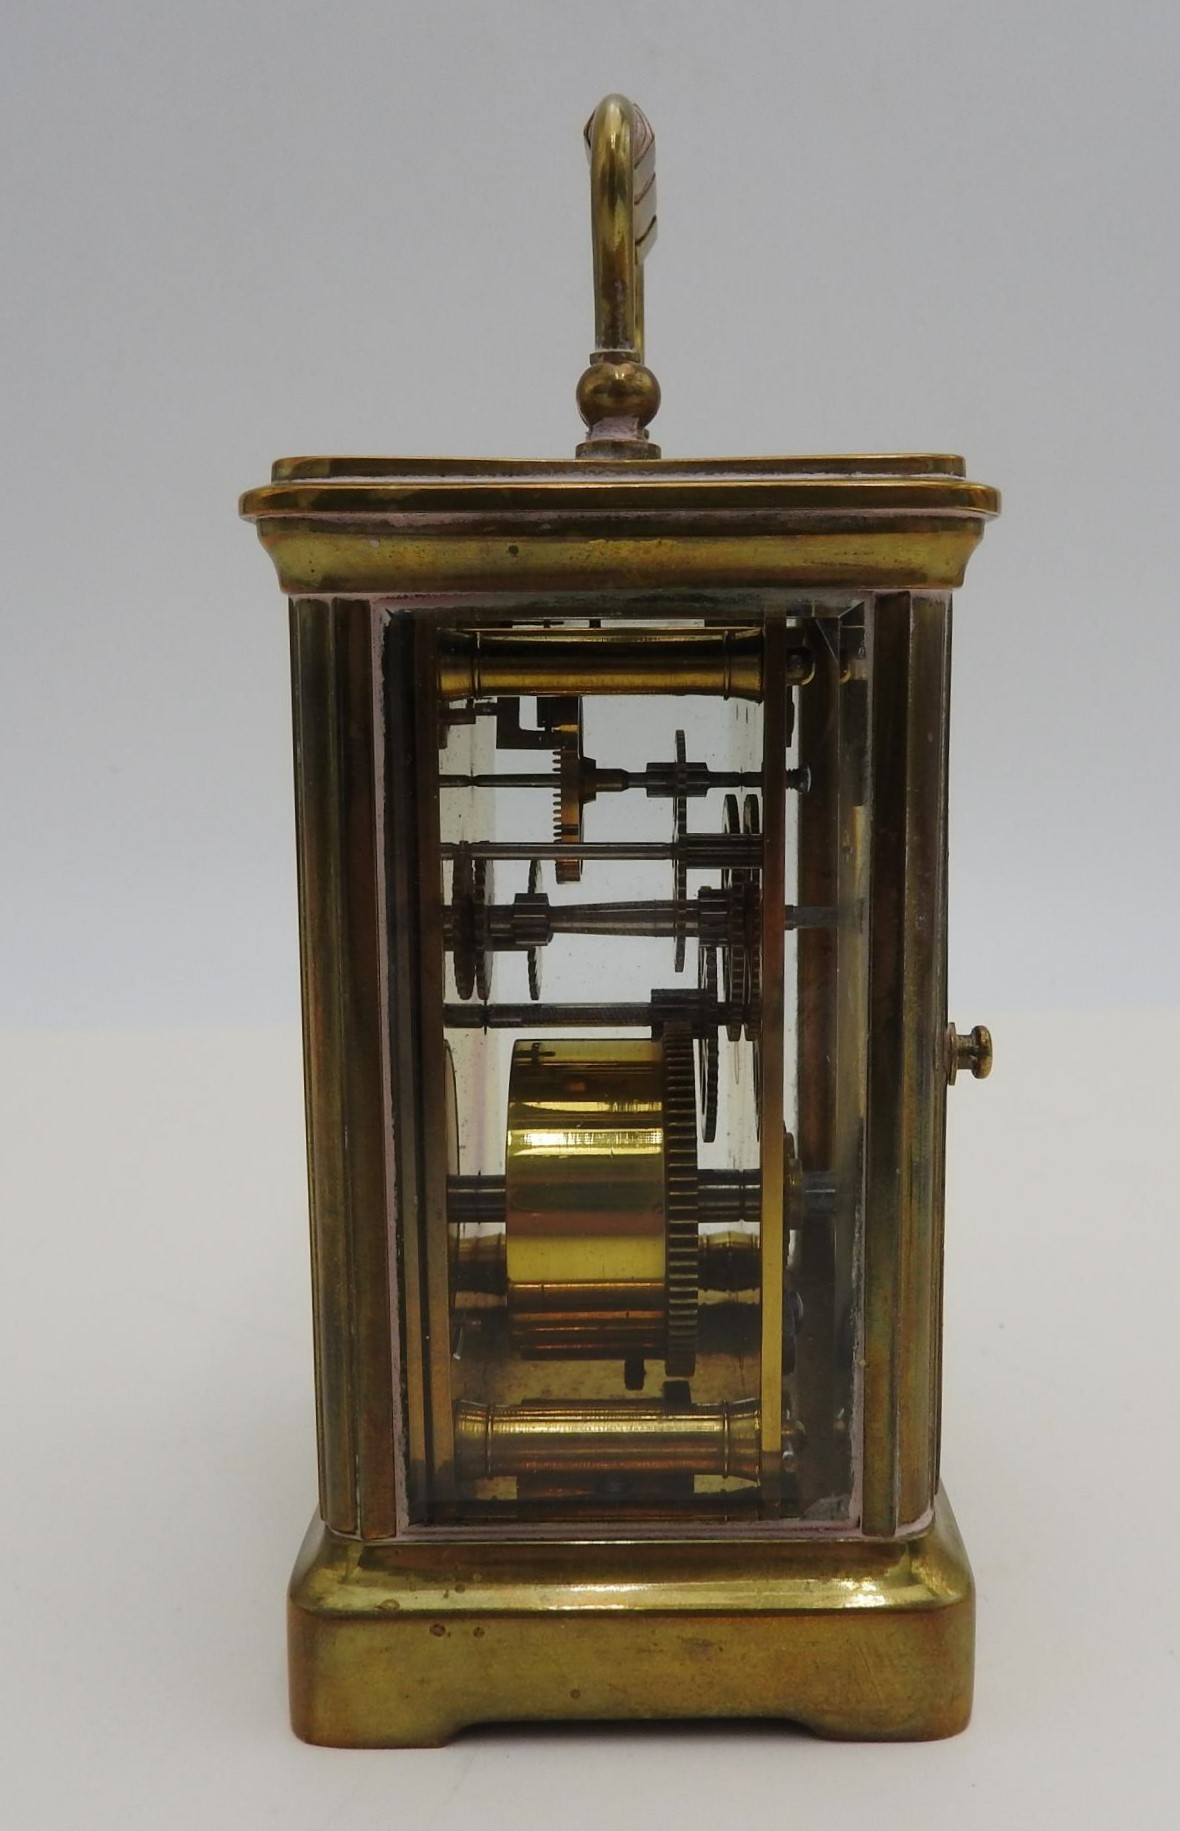 AN EARLY 20TH CENTURY ENGLISH BRASS CARRIAGE CLOCK, 11cm high, with winding key, in working order - Image 4 of 5